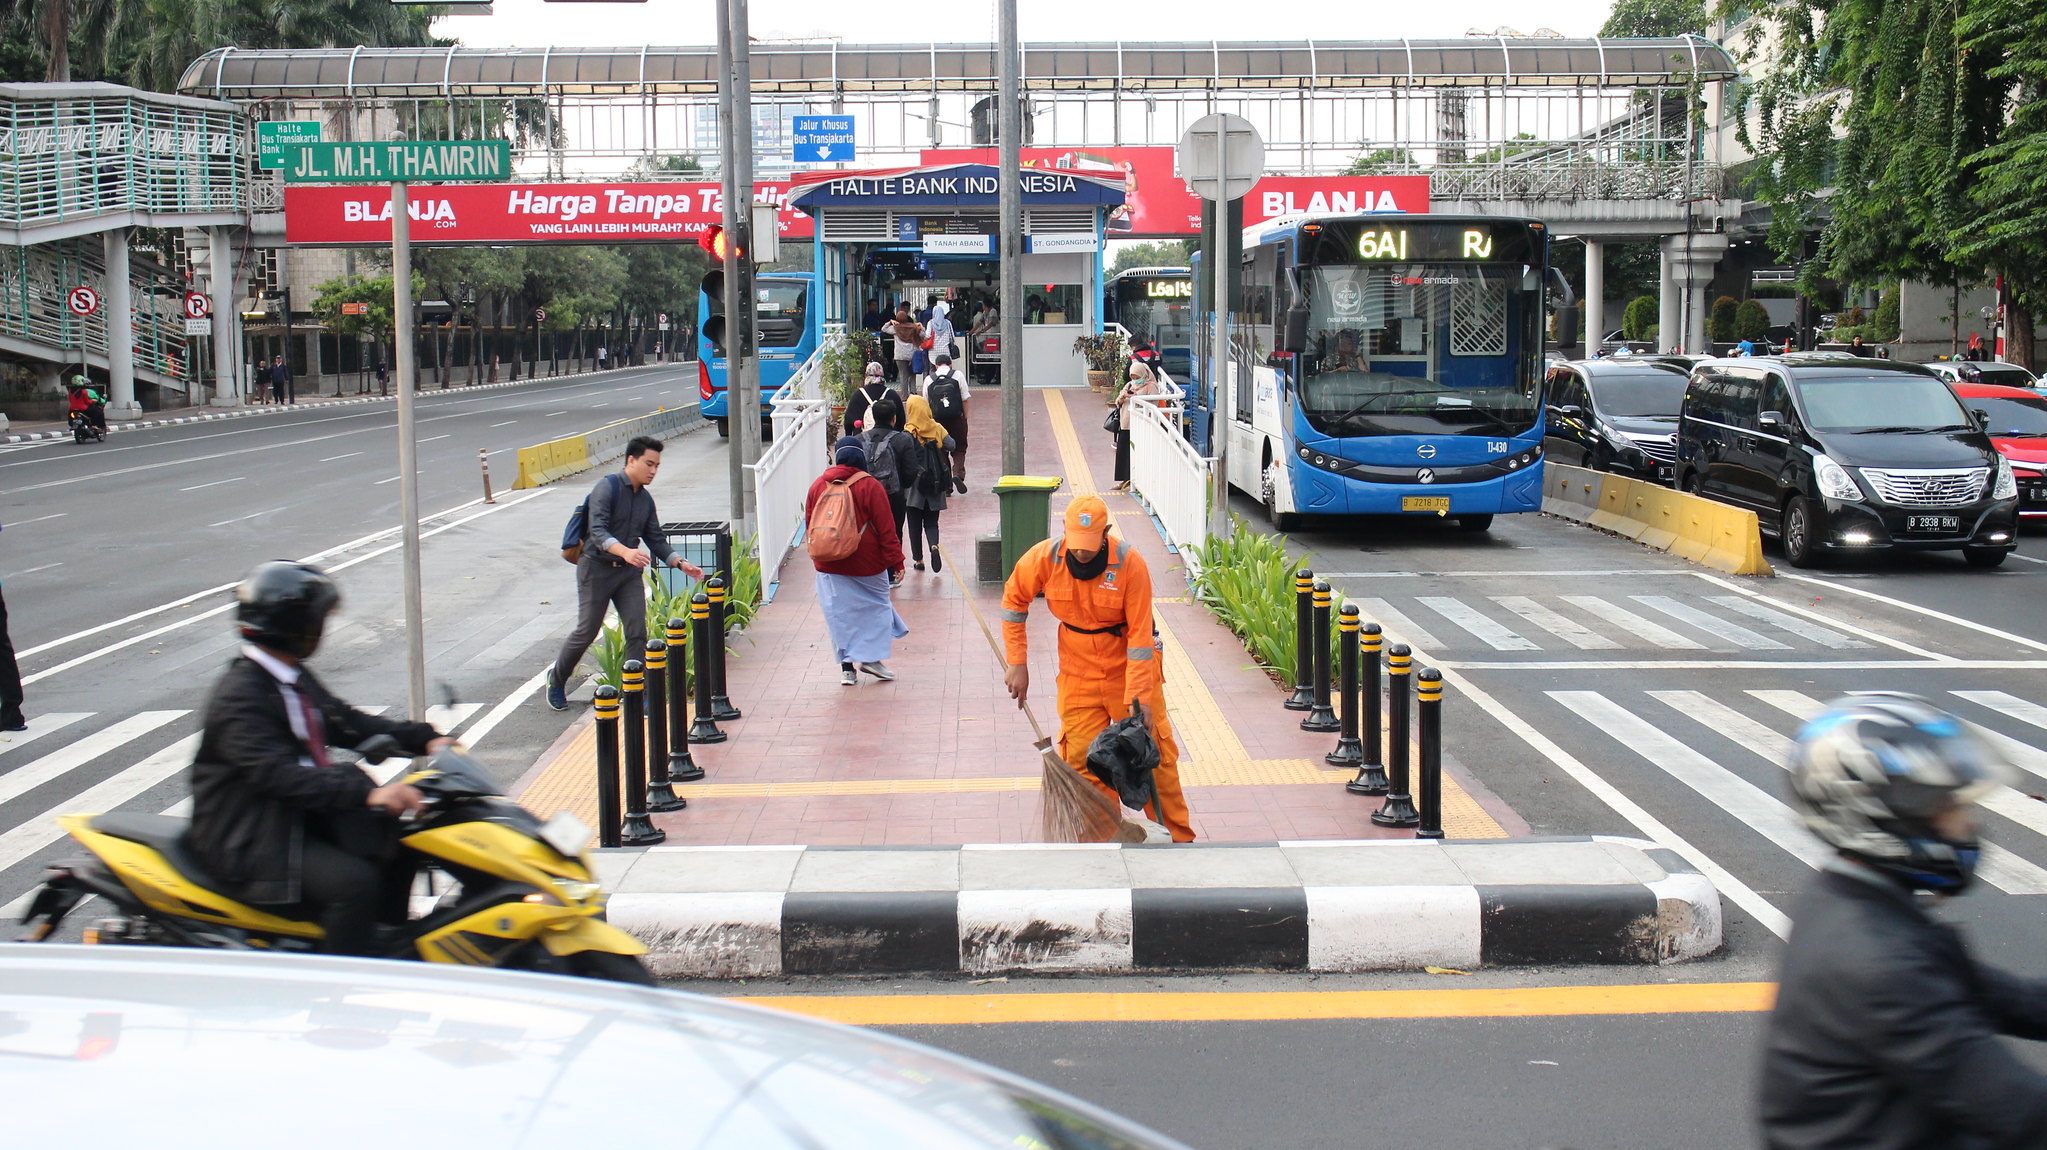 In Jakarta, New Studies Find Bus Electrification is Both Feasible and Urgent